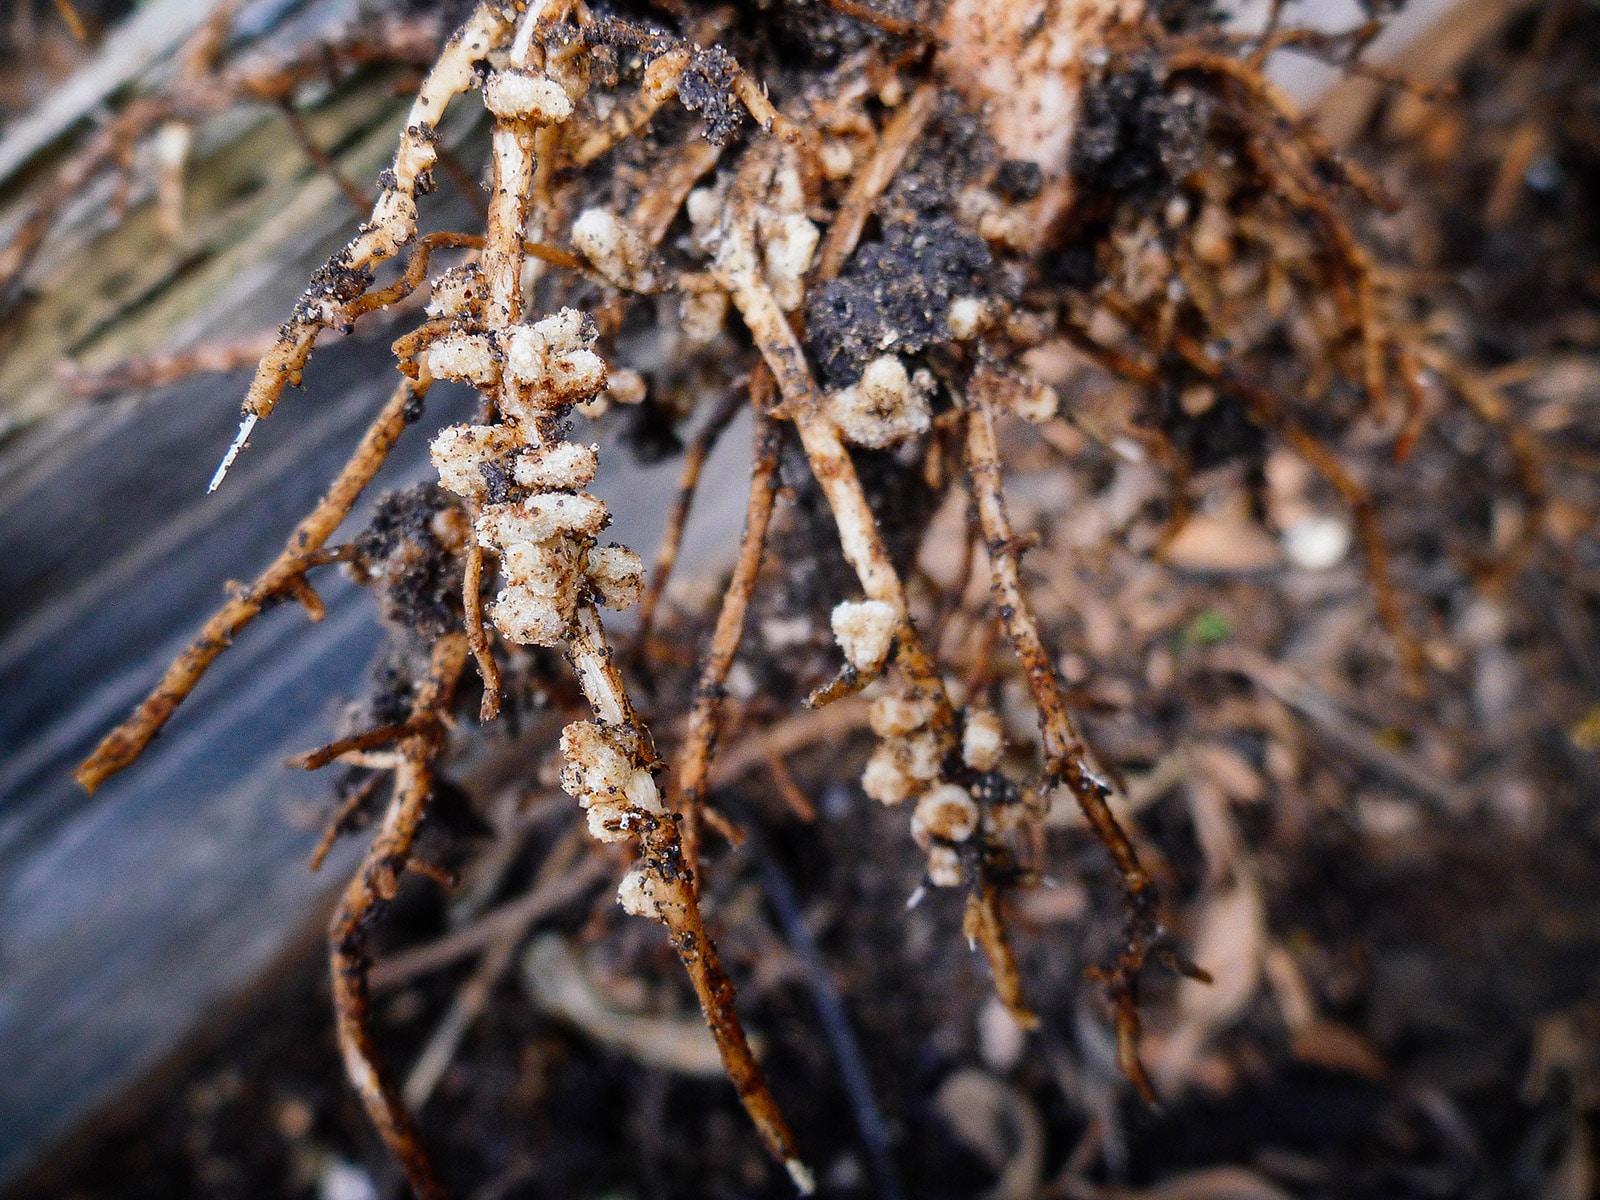 Rhizobia seen on the roots of legume plant